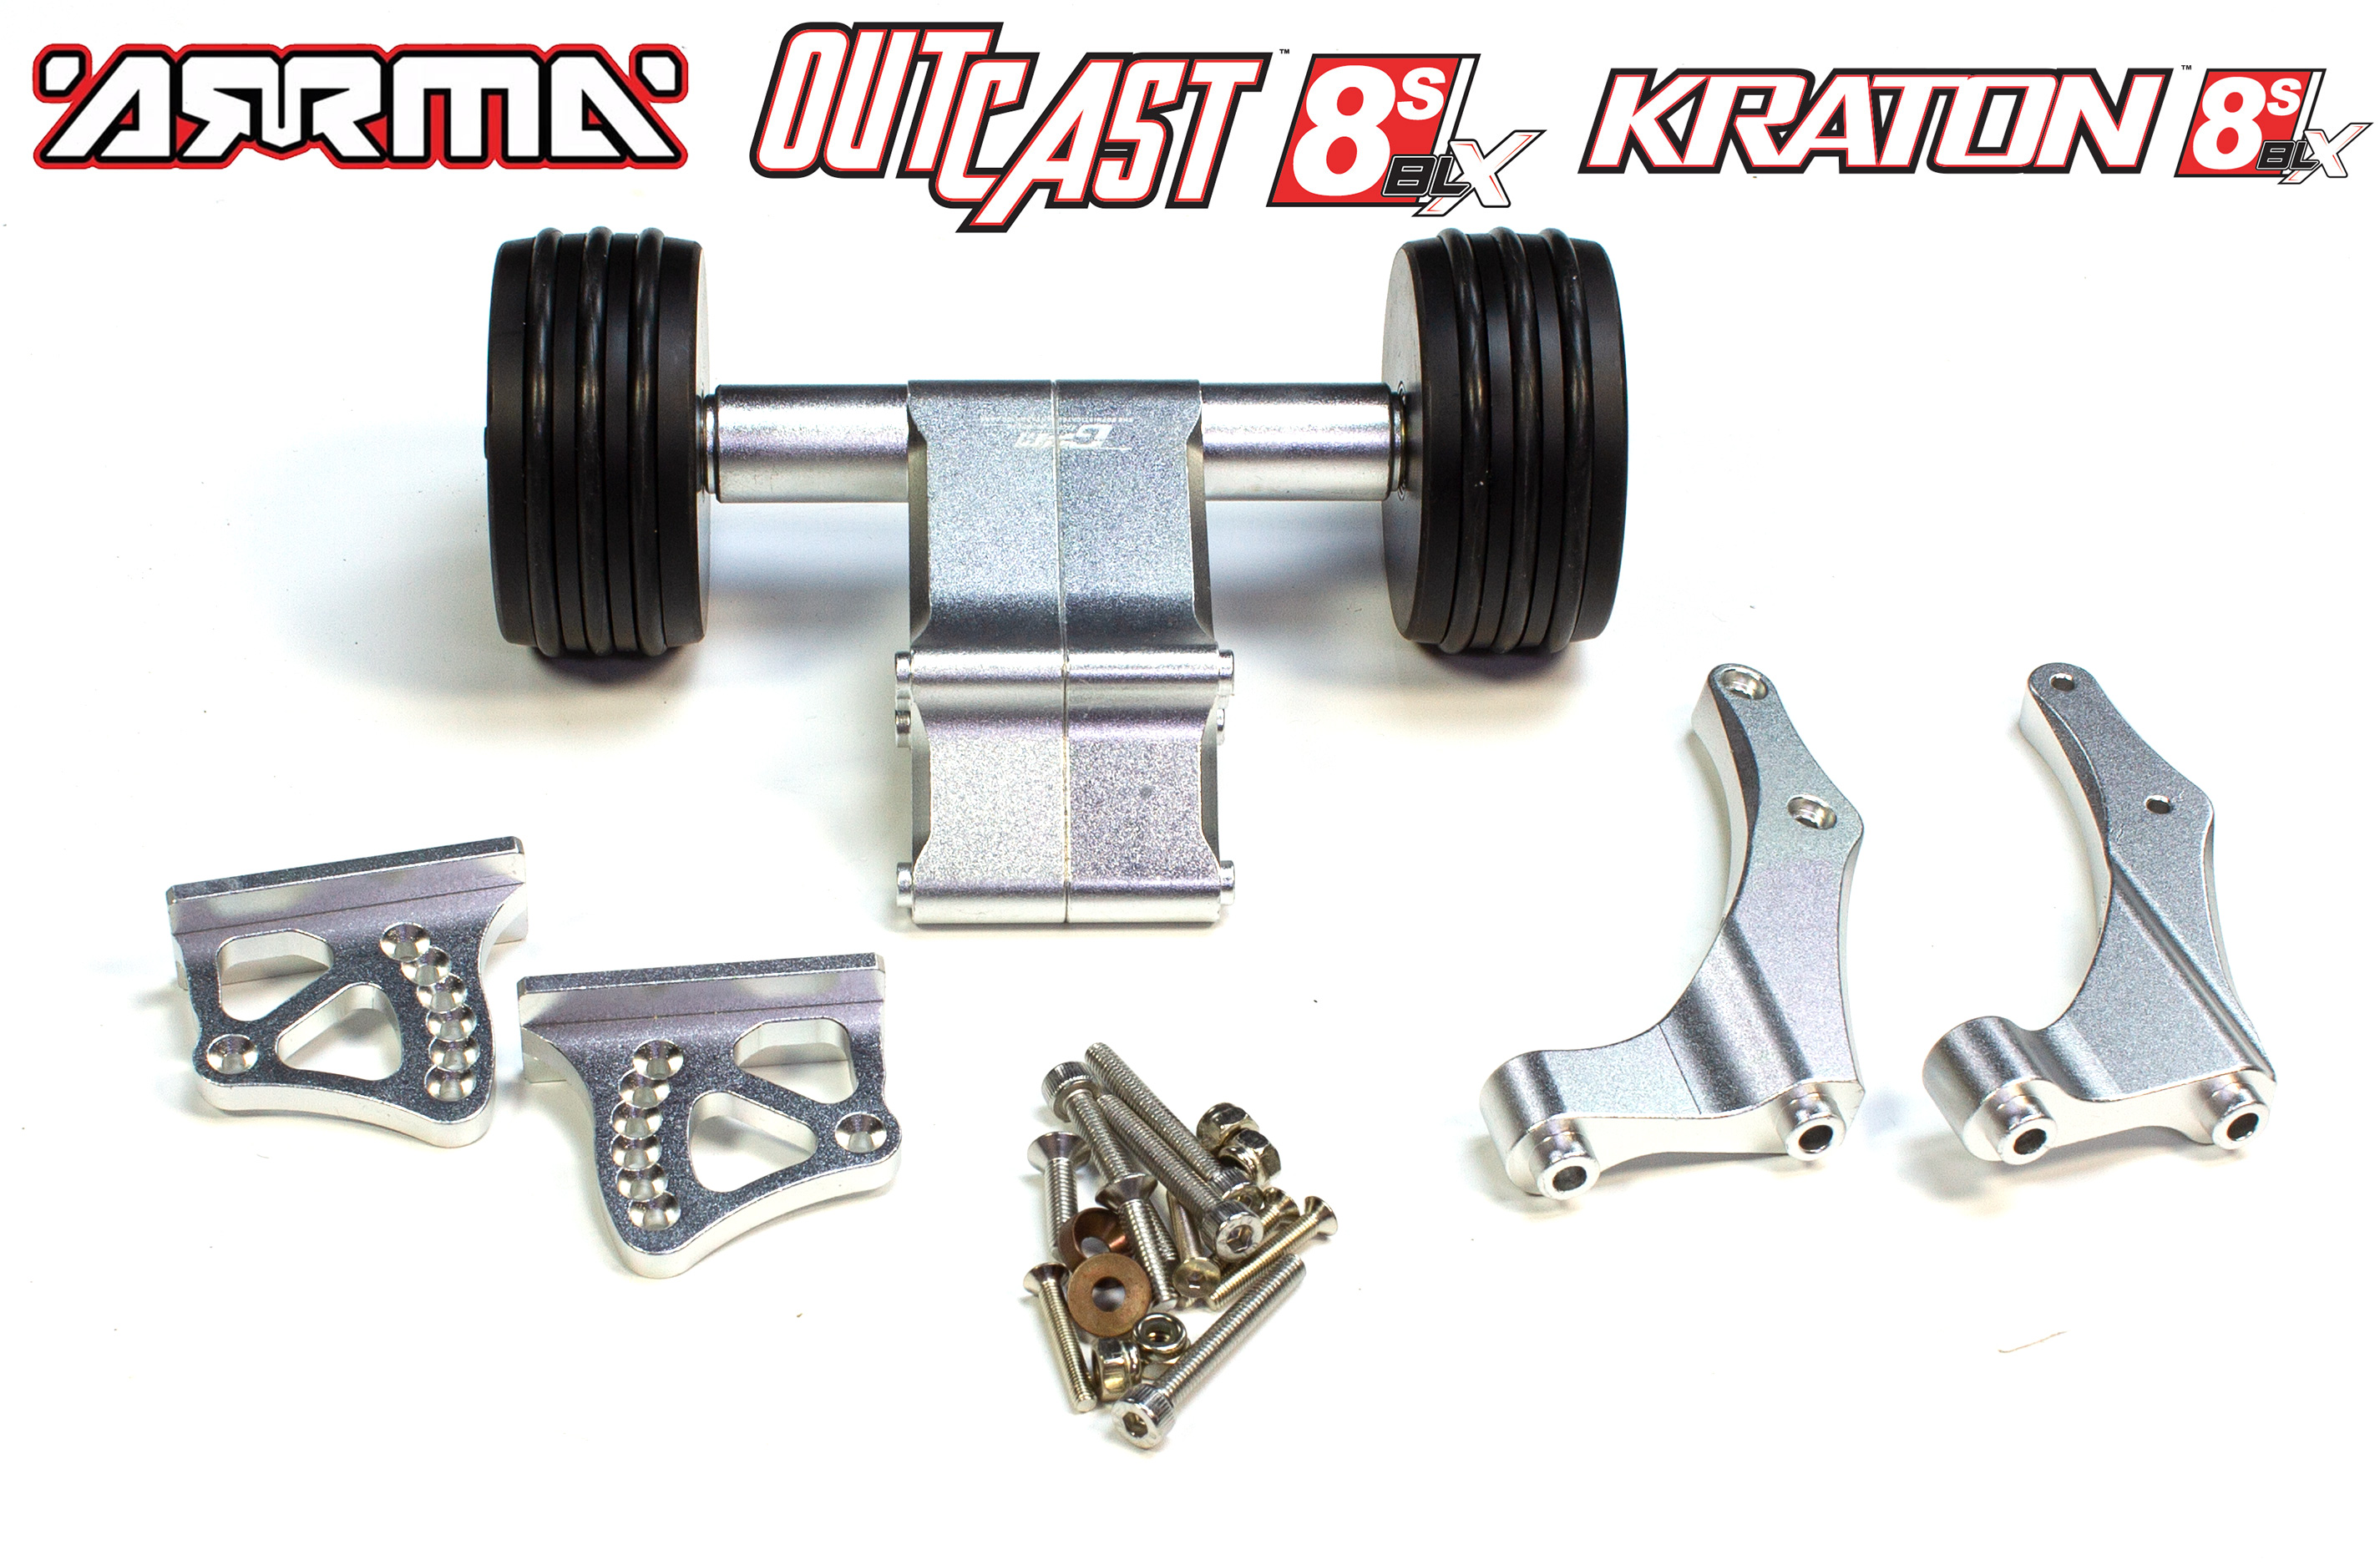 AKX040 GPM Aluminum wheelie bar with wing mount for Arrma Kraton / Outcast 8S